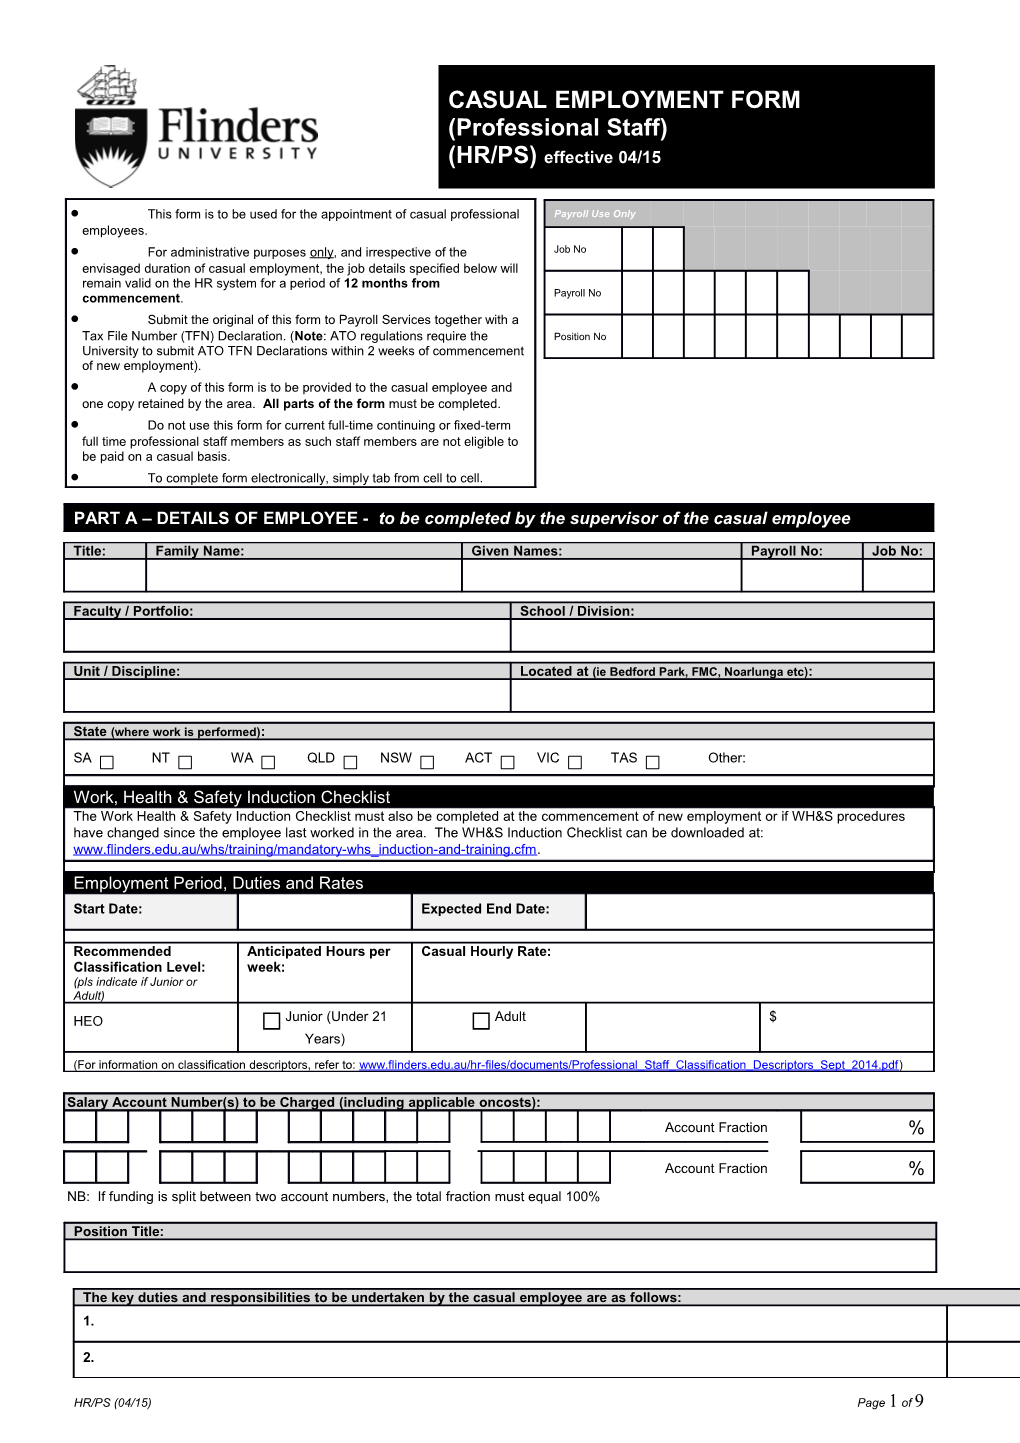 This Form Is to Be Used for the Appointment of Casual Professionalemployees